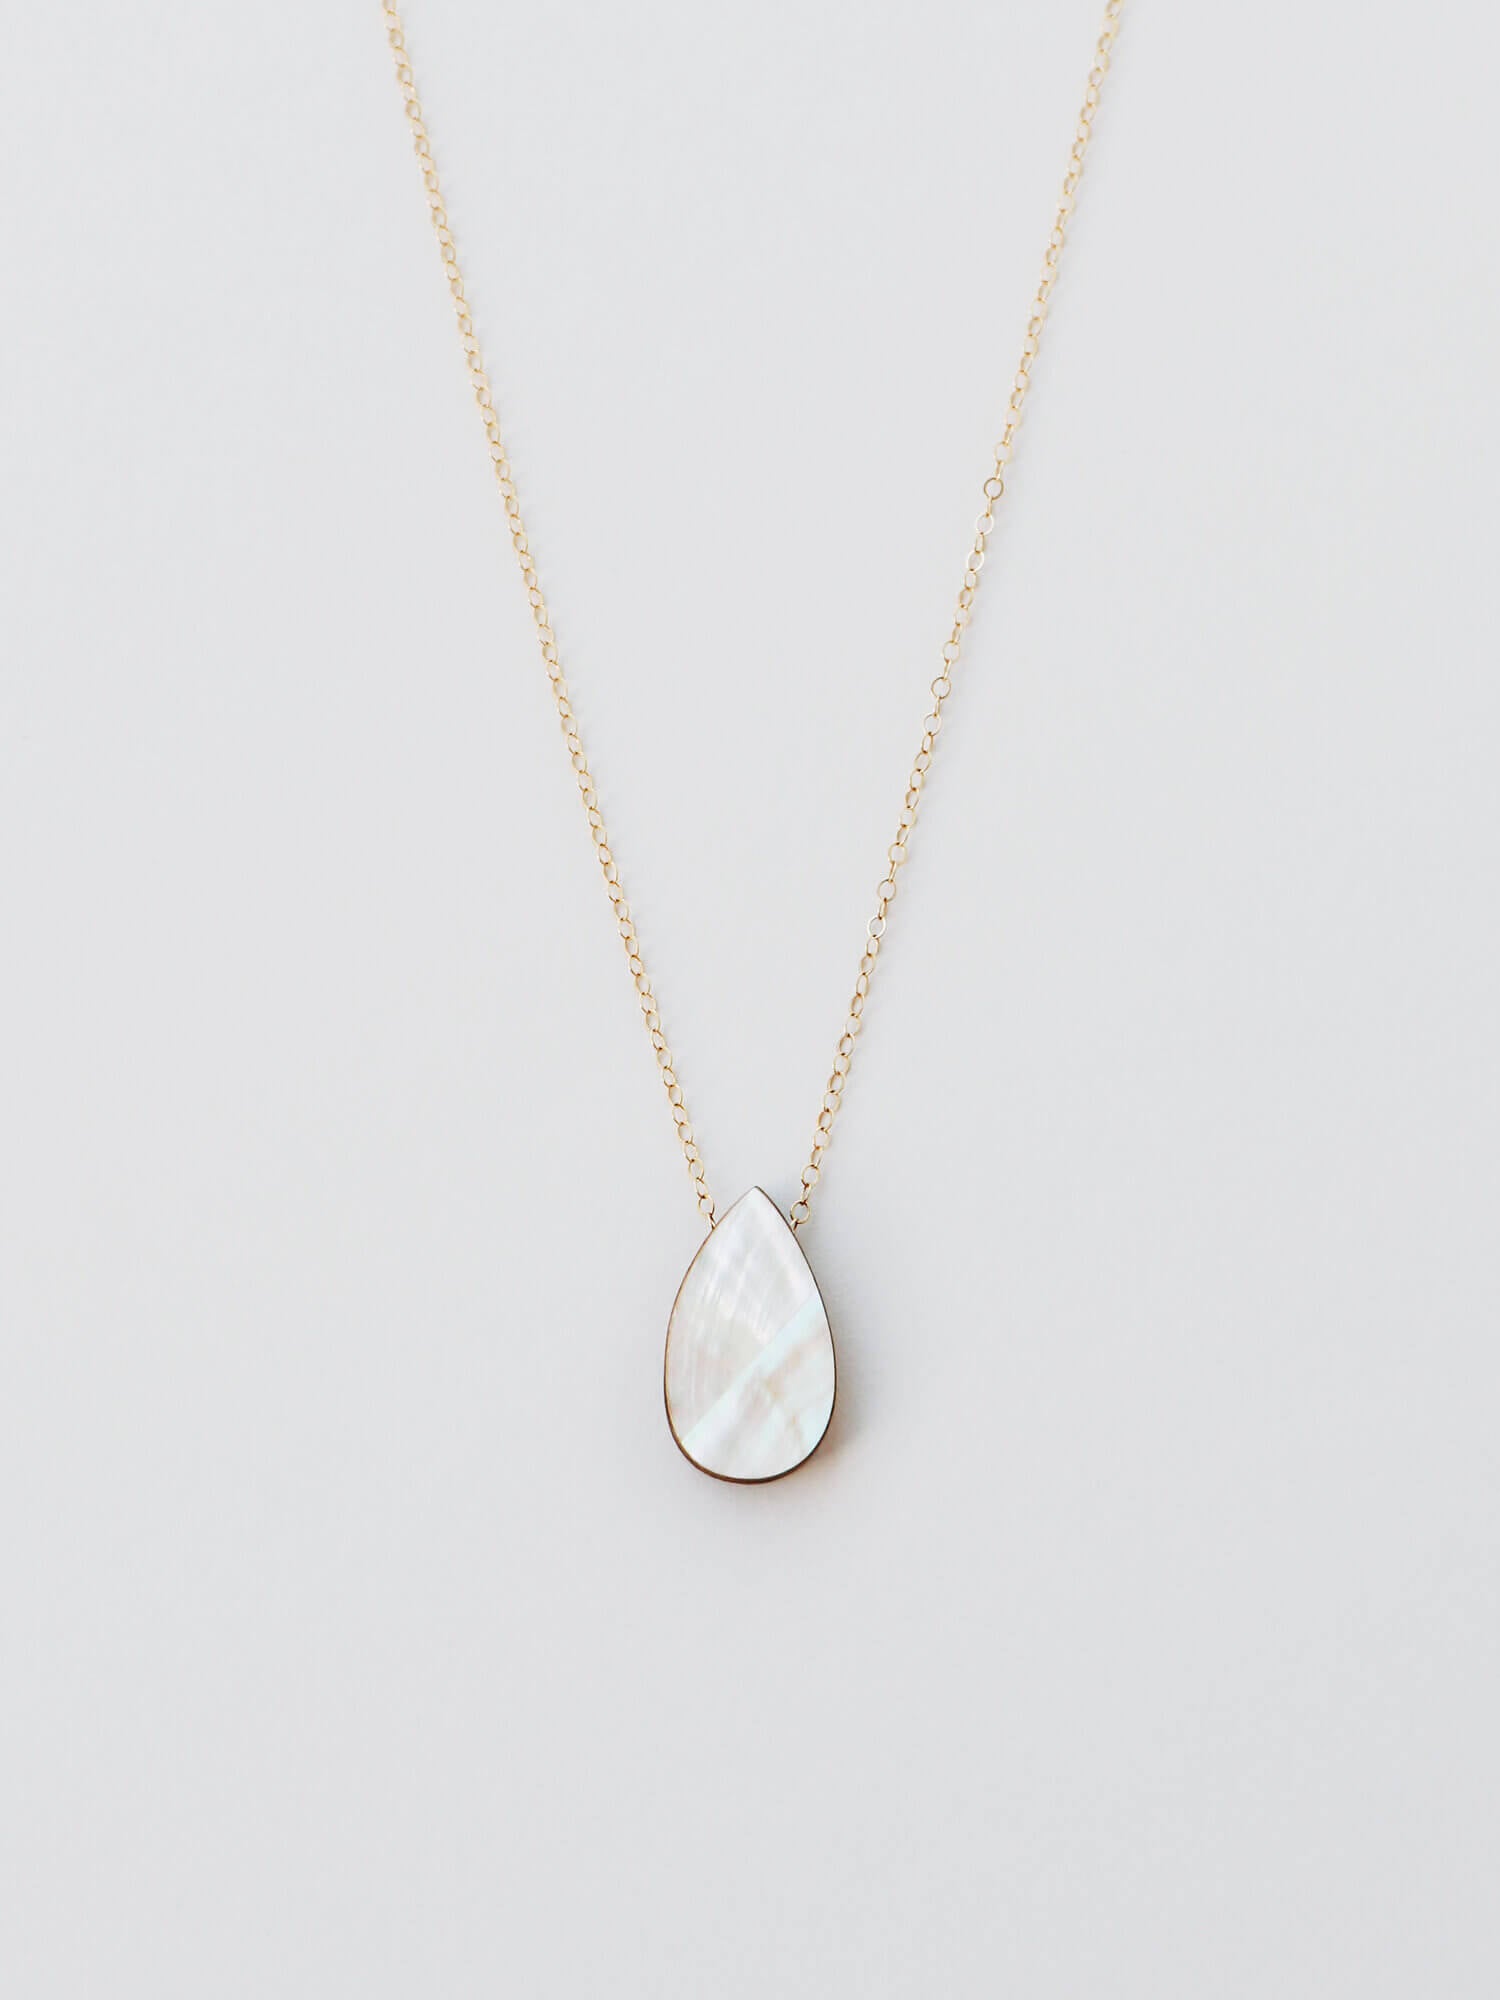 Raindrop Necklace | Cream Mother of Pearl | by Wolf & Moon - Lifestory